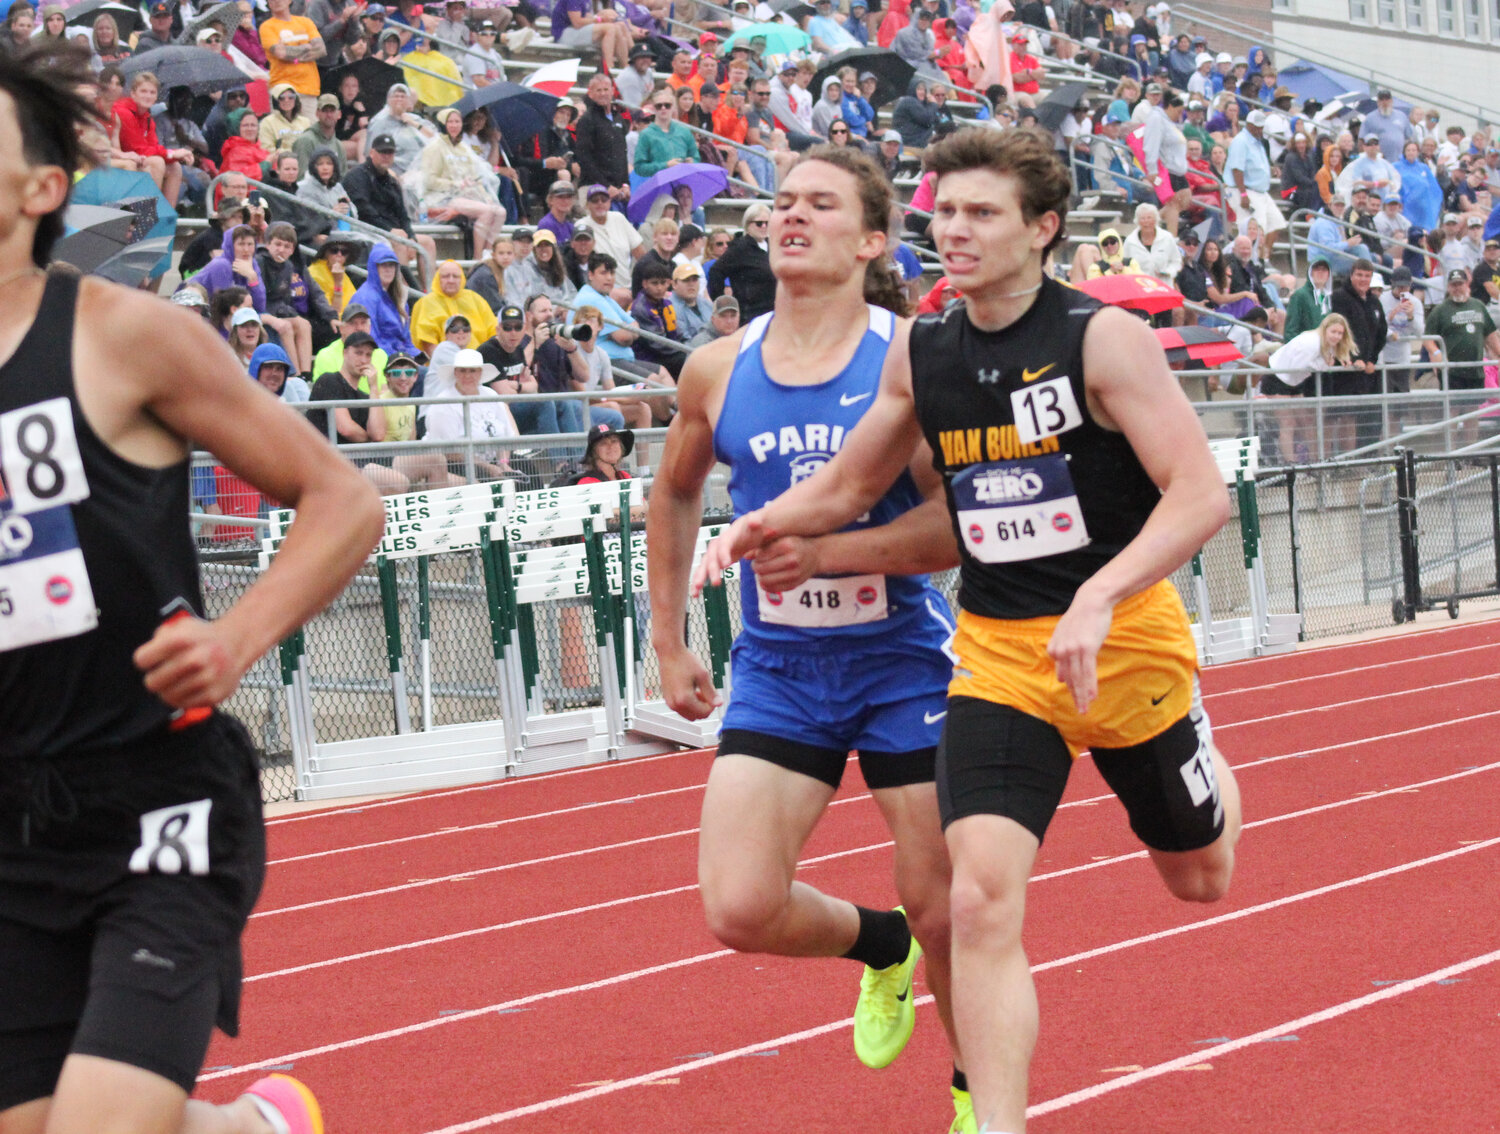 Paris senior Drew Williams digs deep down the home stretch to finish the boys 800-meter run in seventh place for all-state honors on Friday in the Class 1 state meet at Adkins Stadium in Jefferson City. Williams medaled in the event the previous two years.